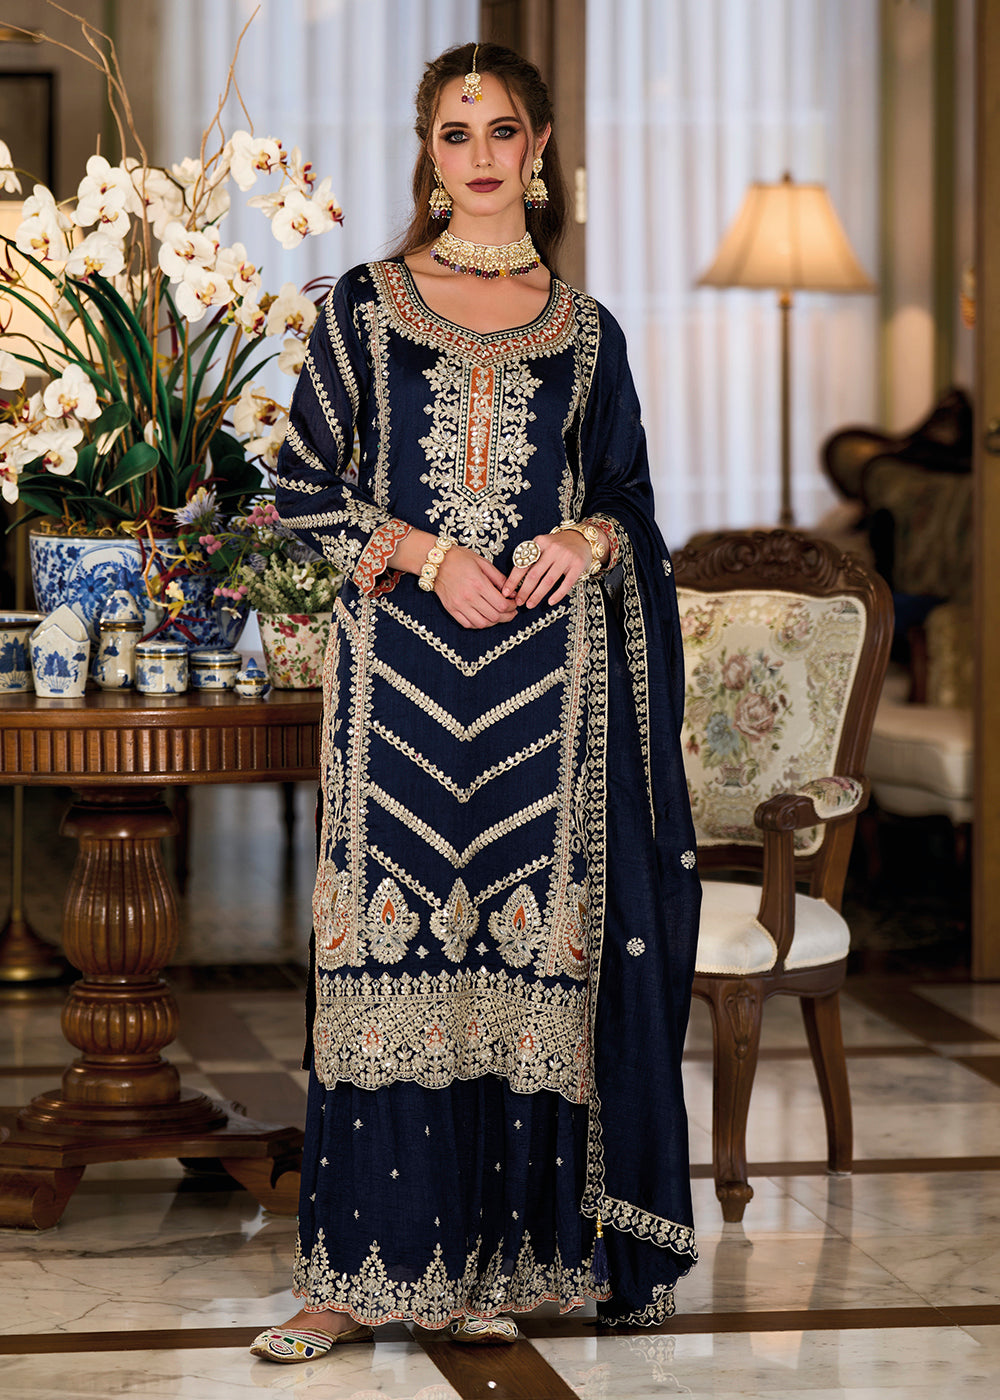 Shop Now Premium Silk Navy Blue Embroidered Wedding Sharara Suit Online at Empress Clothing in USA, UK, Canada, Italy & Worldwide.